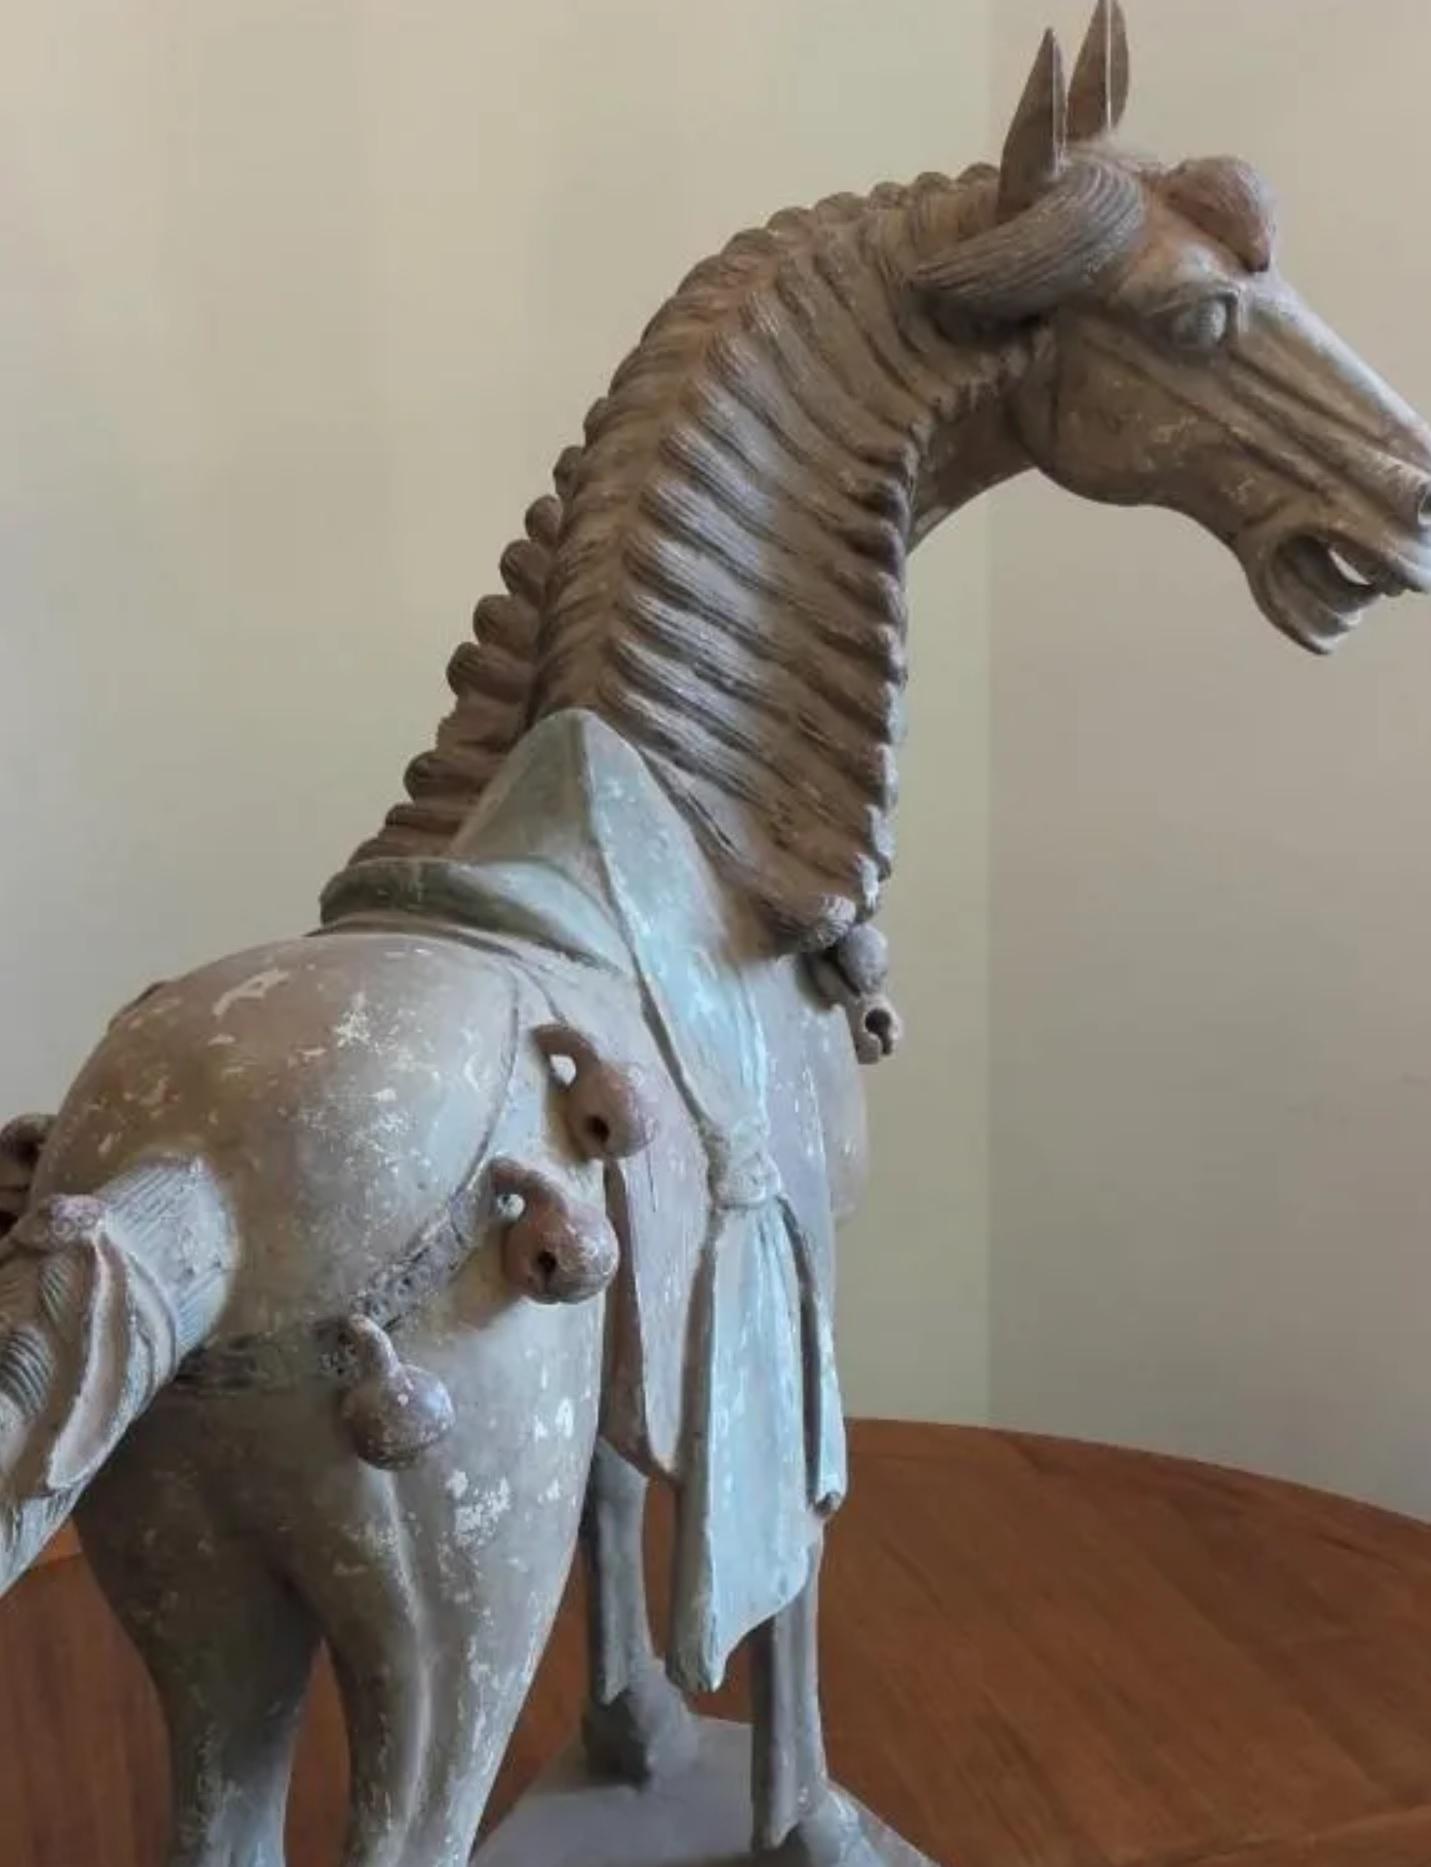 A one piece pottery horse, standing on all fours and striding with its right hoof forward. Extended snout ends in parted lips showing teeth beneath in a braying attitude. Low relief bridle on face and well defined eyes. Raised mane down back of the